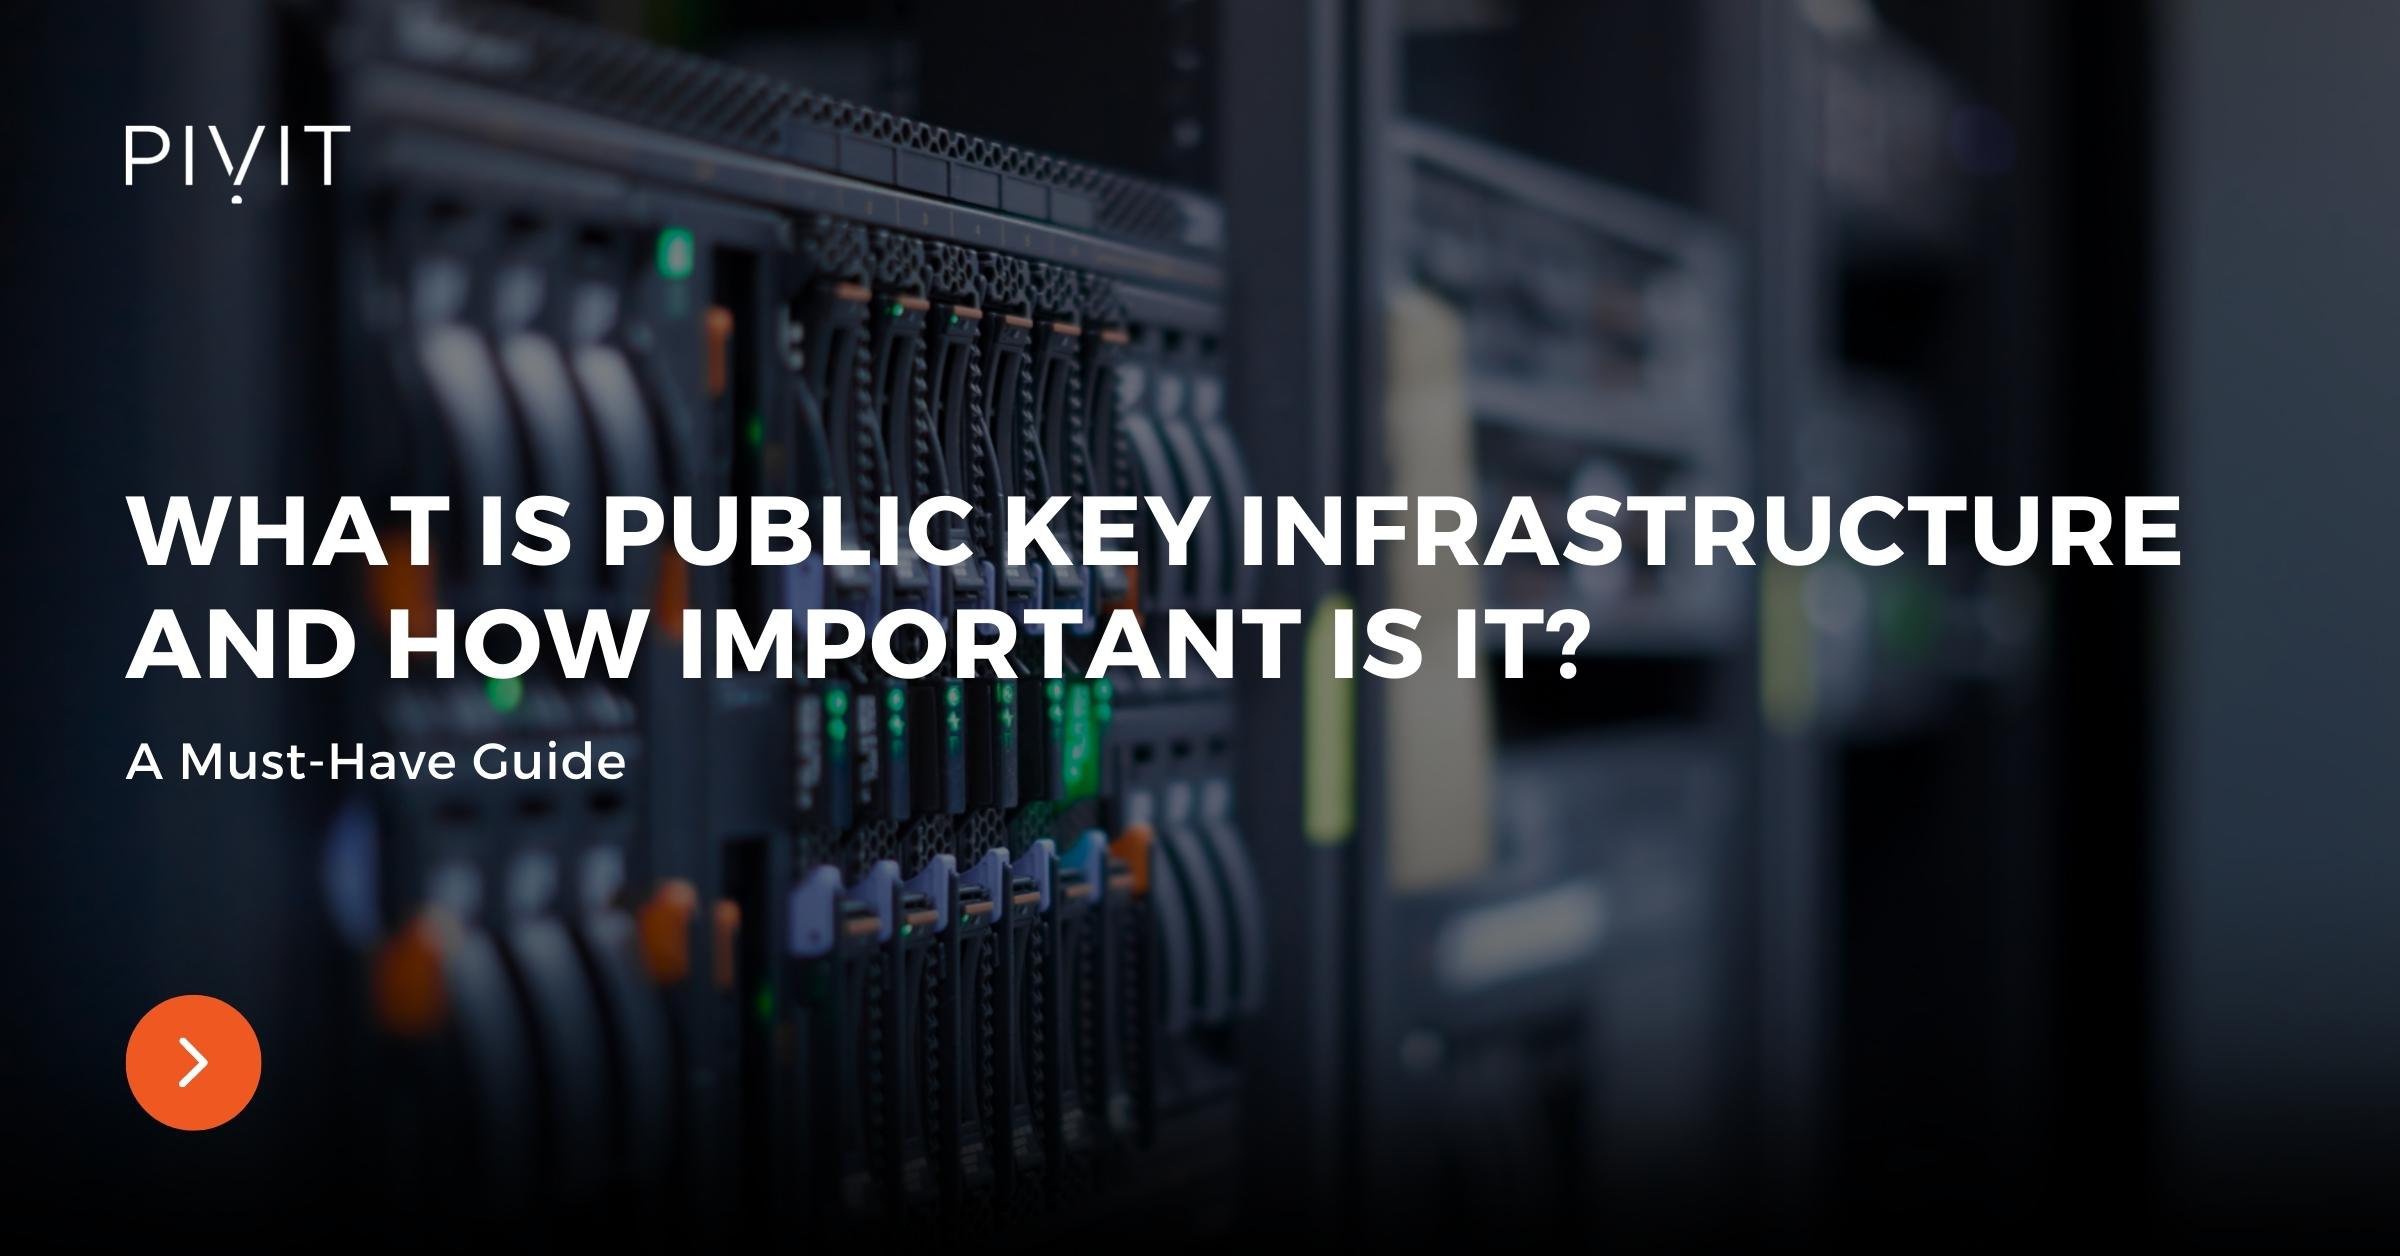 A Must-Have Guide: What Is Public Key Infrastructure and How Important Is It? 